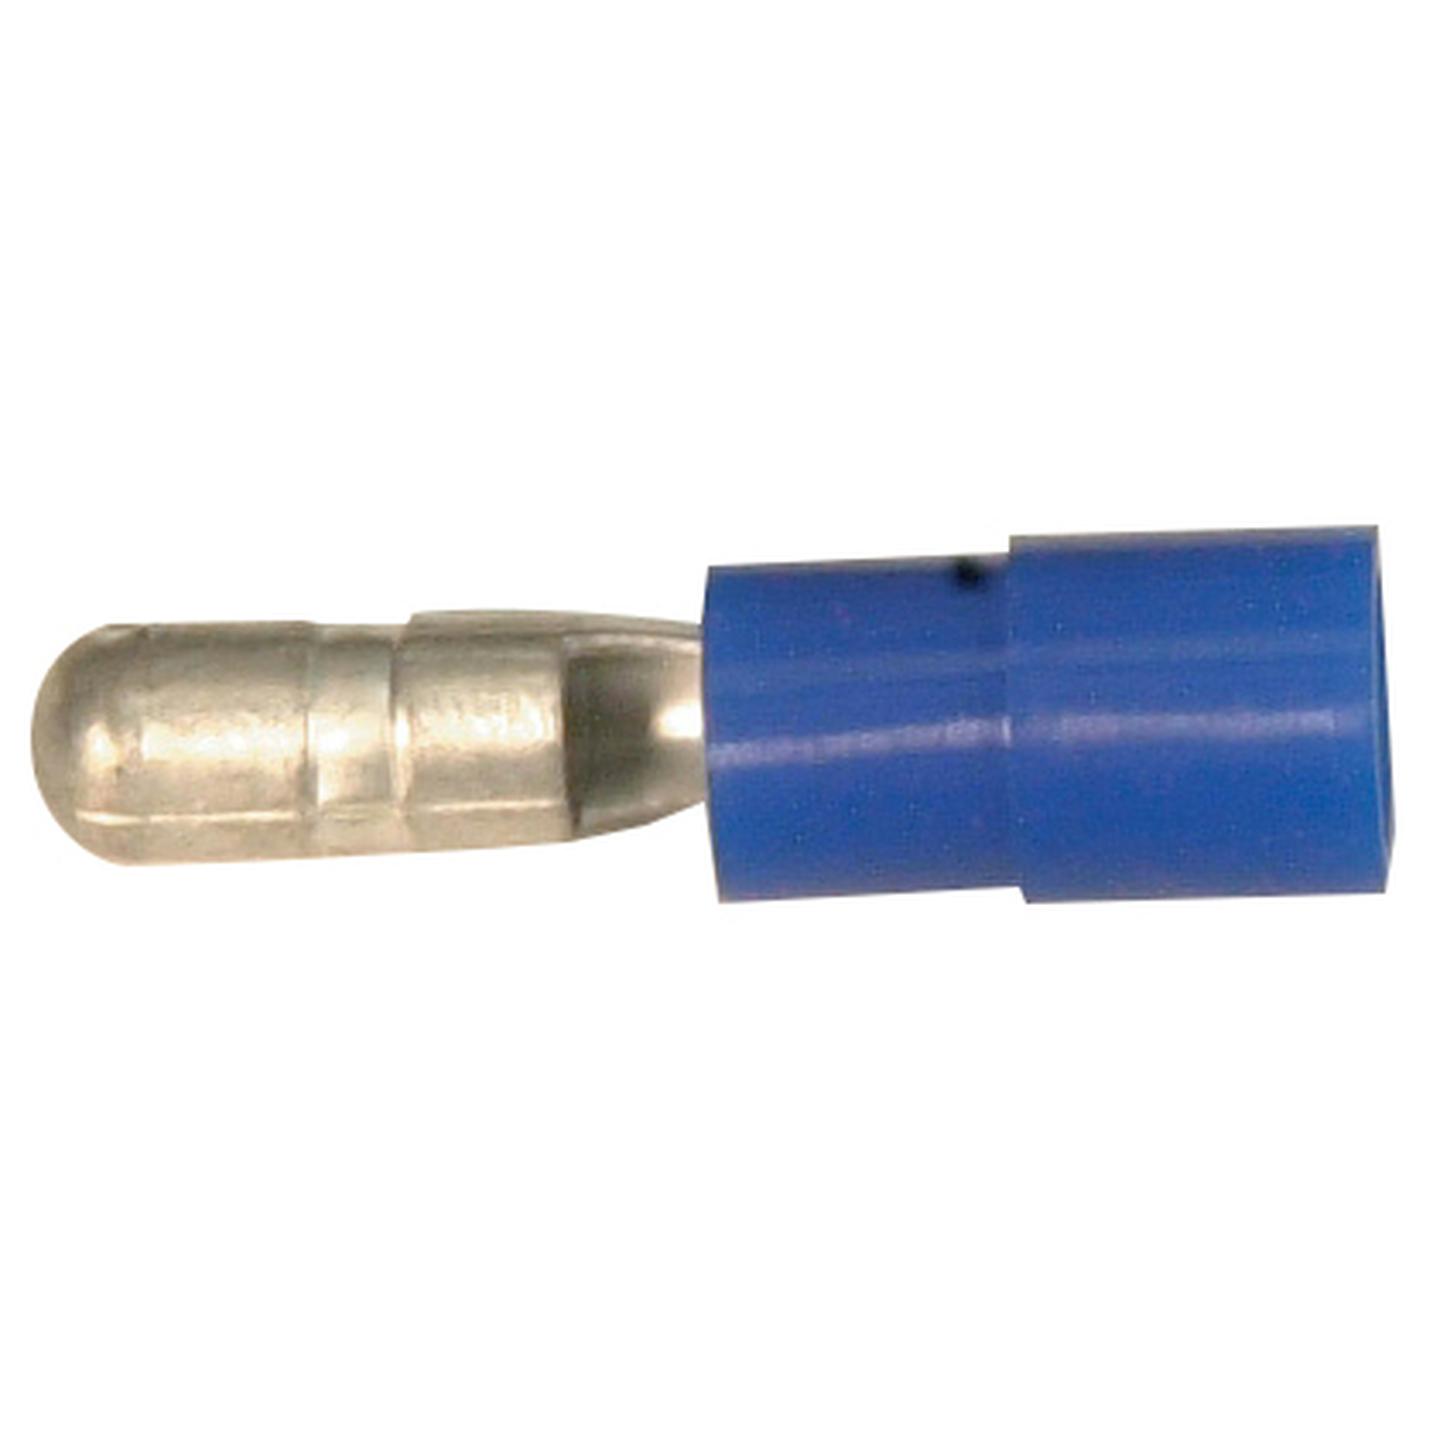 4mm Blue Male Bullet Style Crimp Terminal - Pack of 100